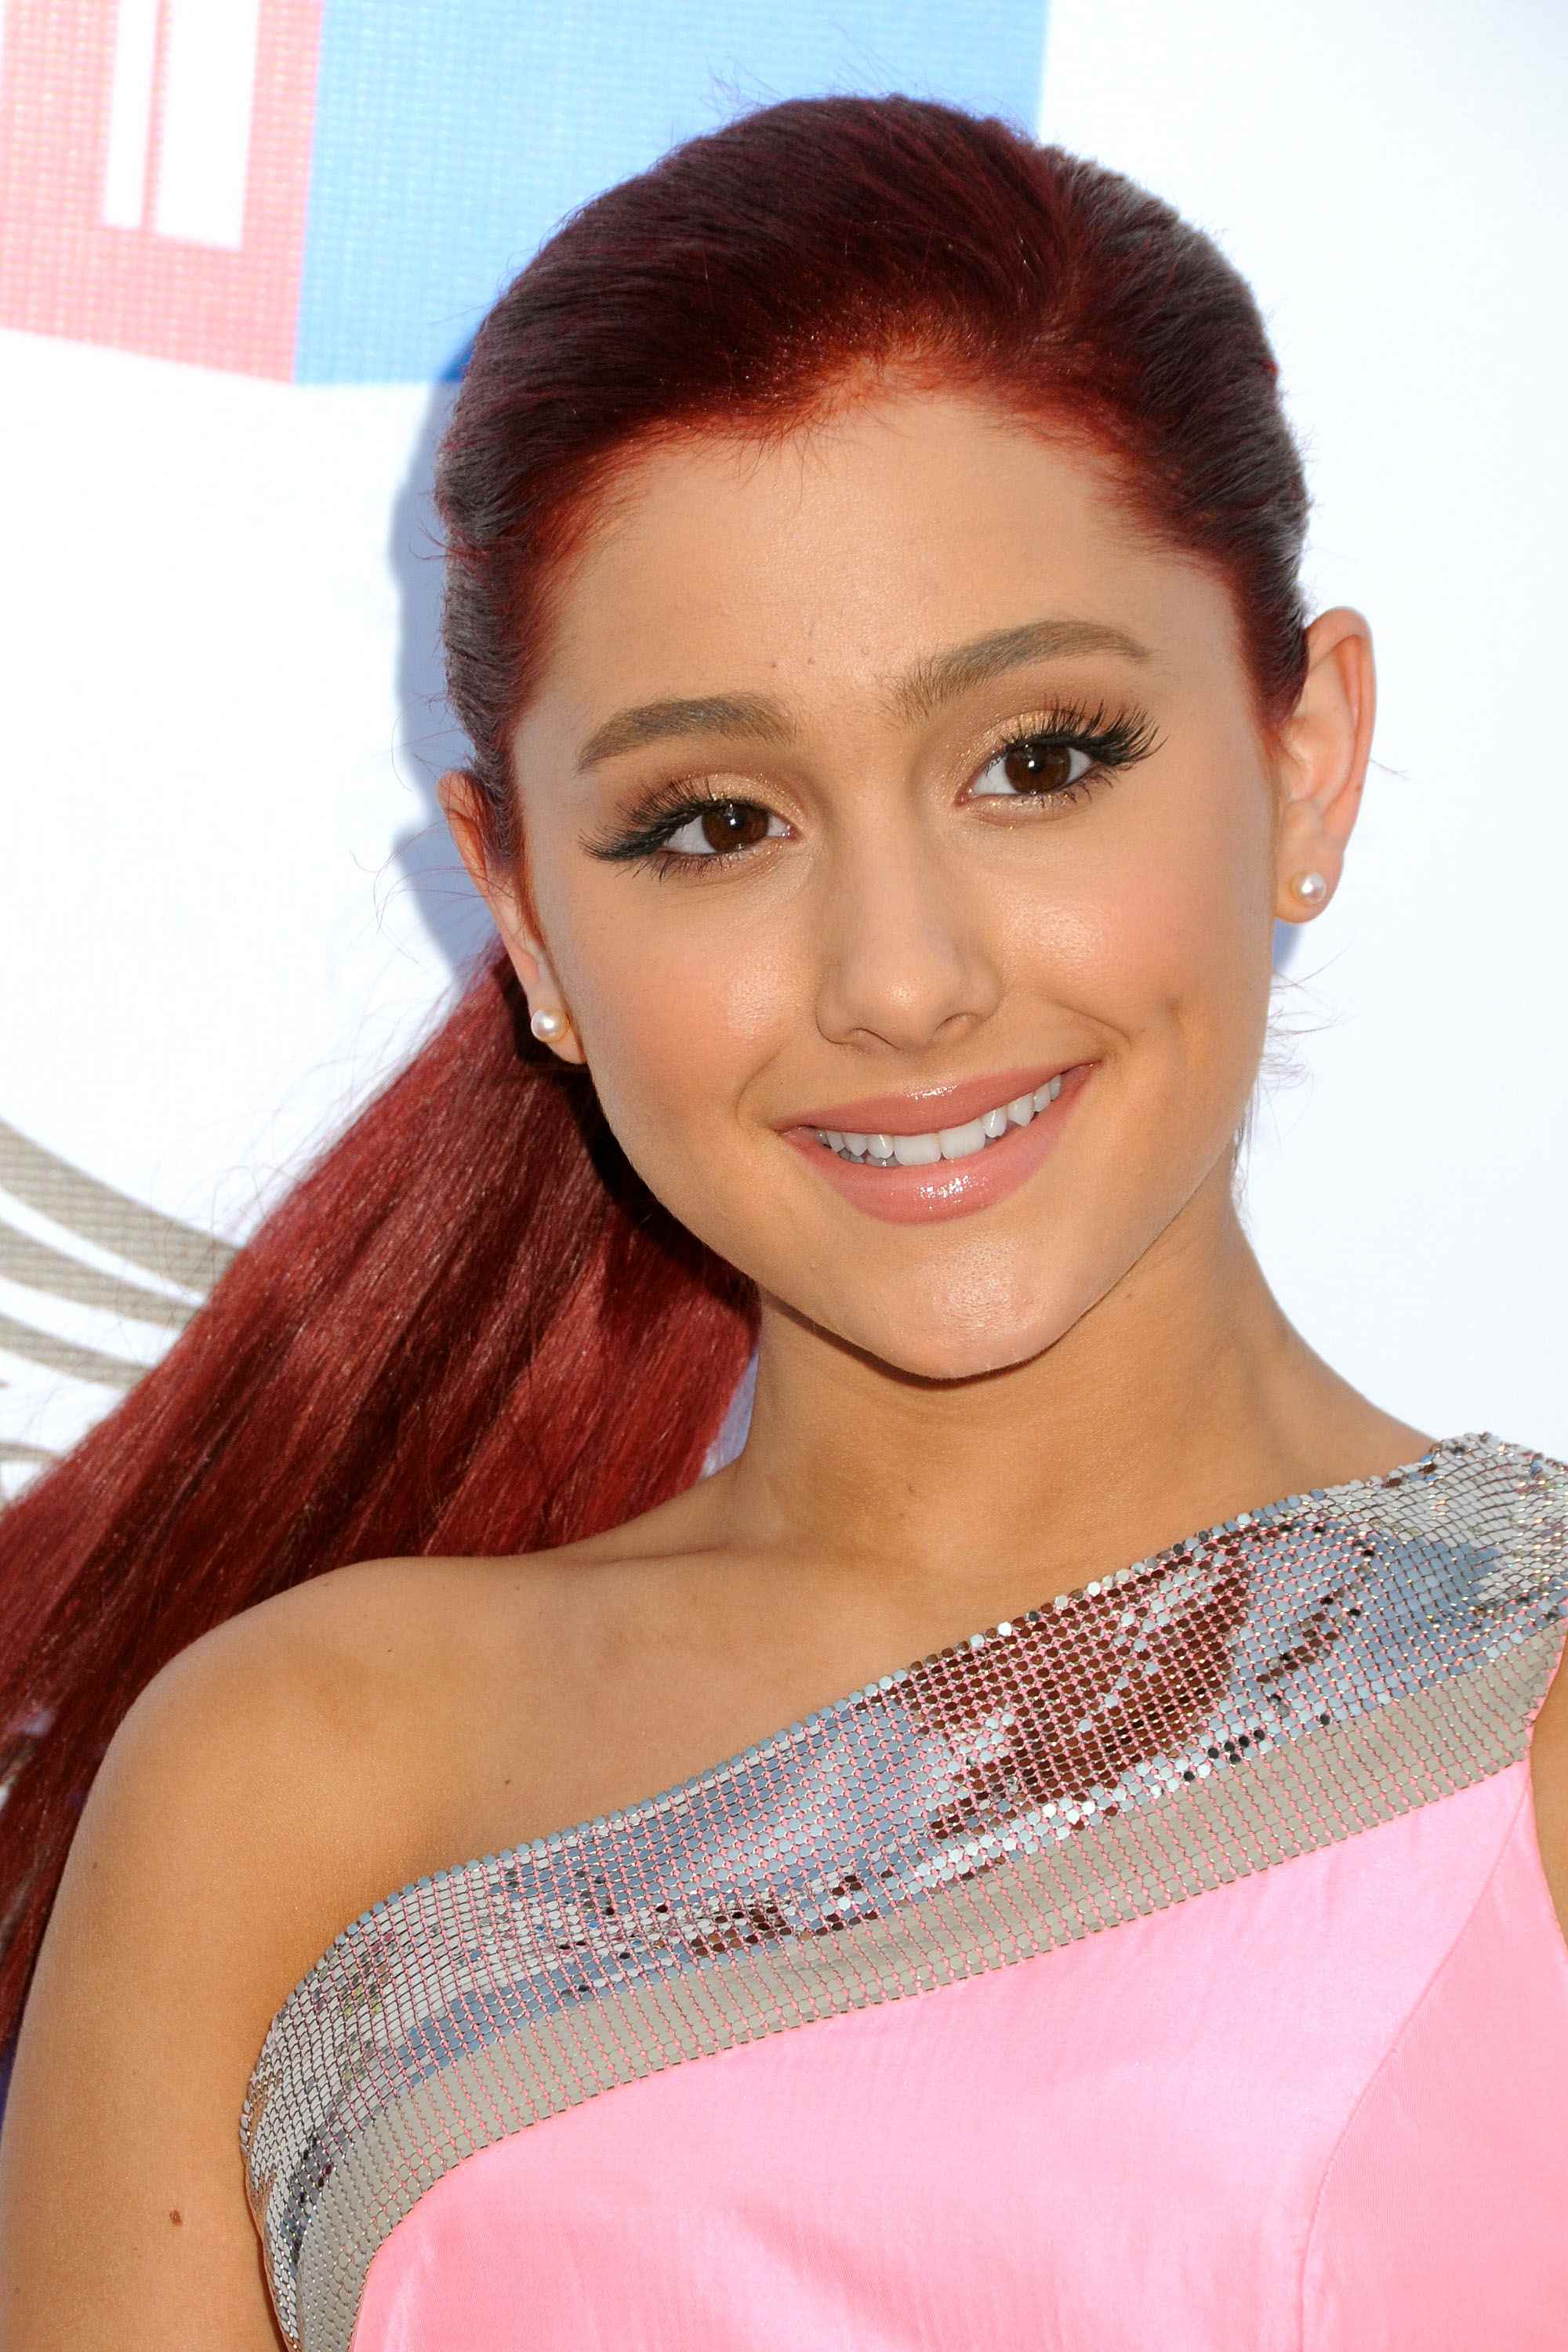 Ariana Grande Nude - 10 Pictures: Rating 8.36/10